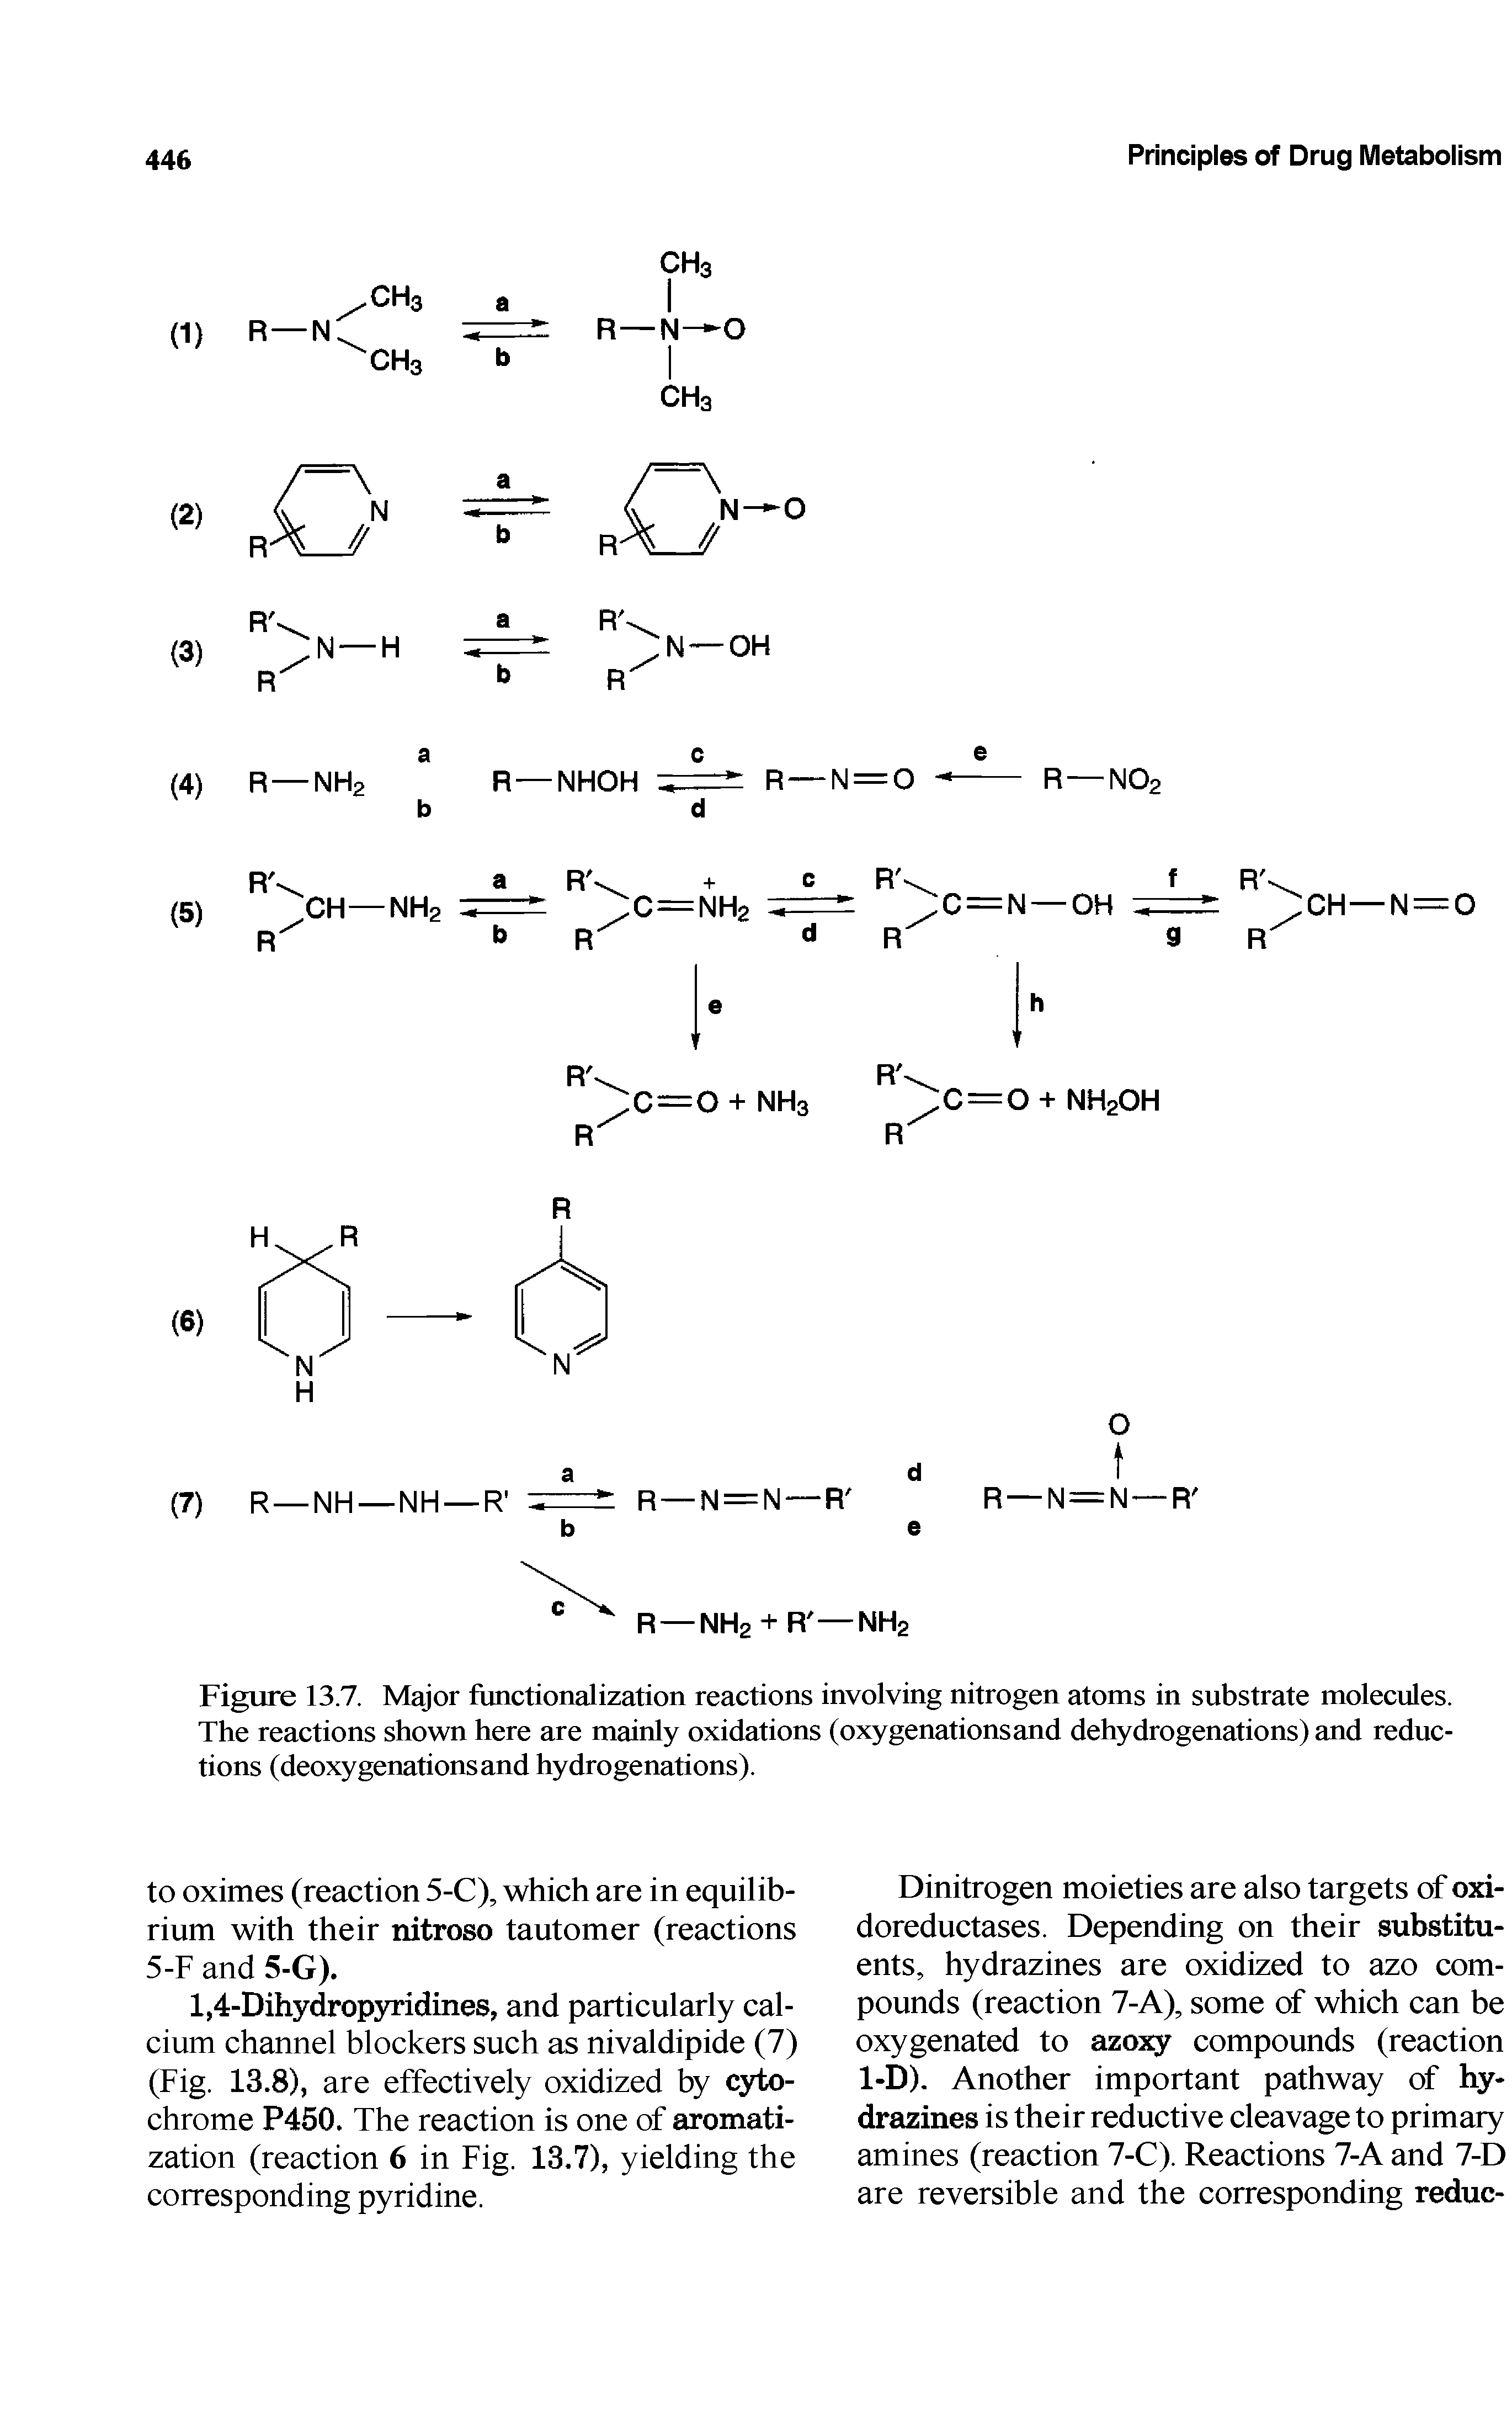 Figure 13.7. Major functionalization reactions involving nitrogen atoms in substrate molecules. The reactions shown here are mainly oxidations (oxygenations and dehydrogenations) and reductions (deoxygenationsand hydrogenations).